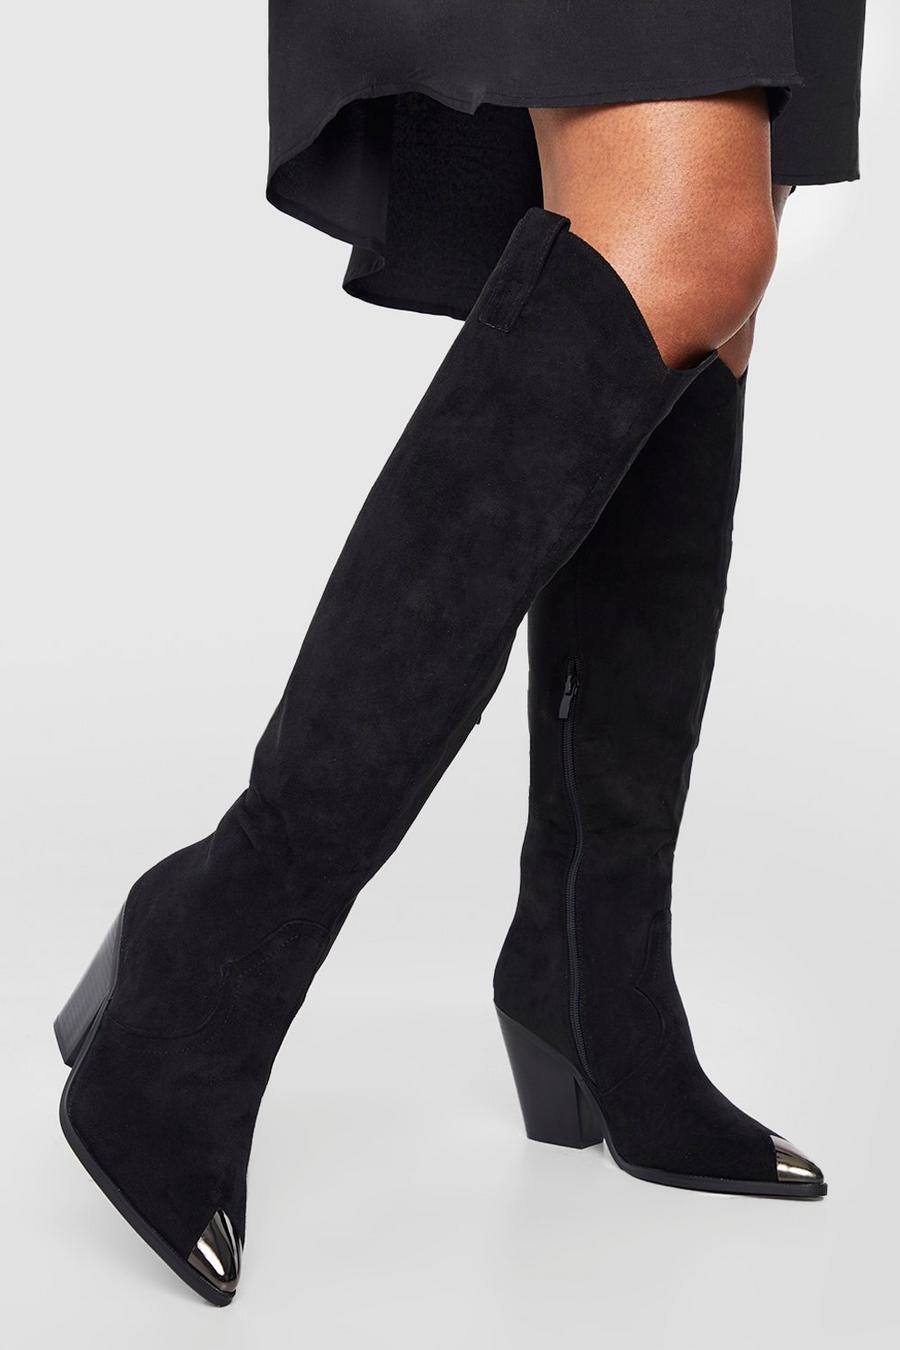 Black Knee High Pull On Western Cowboy Boots 